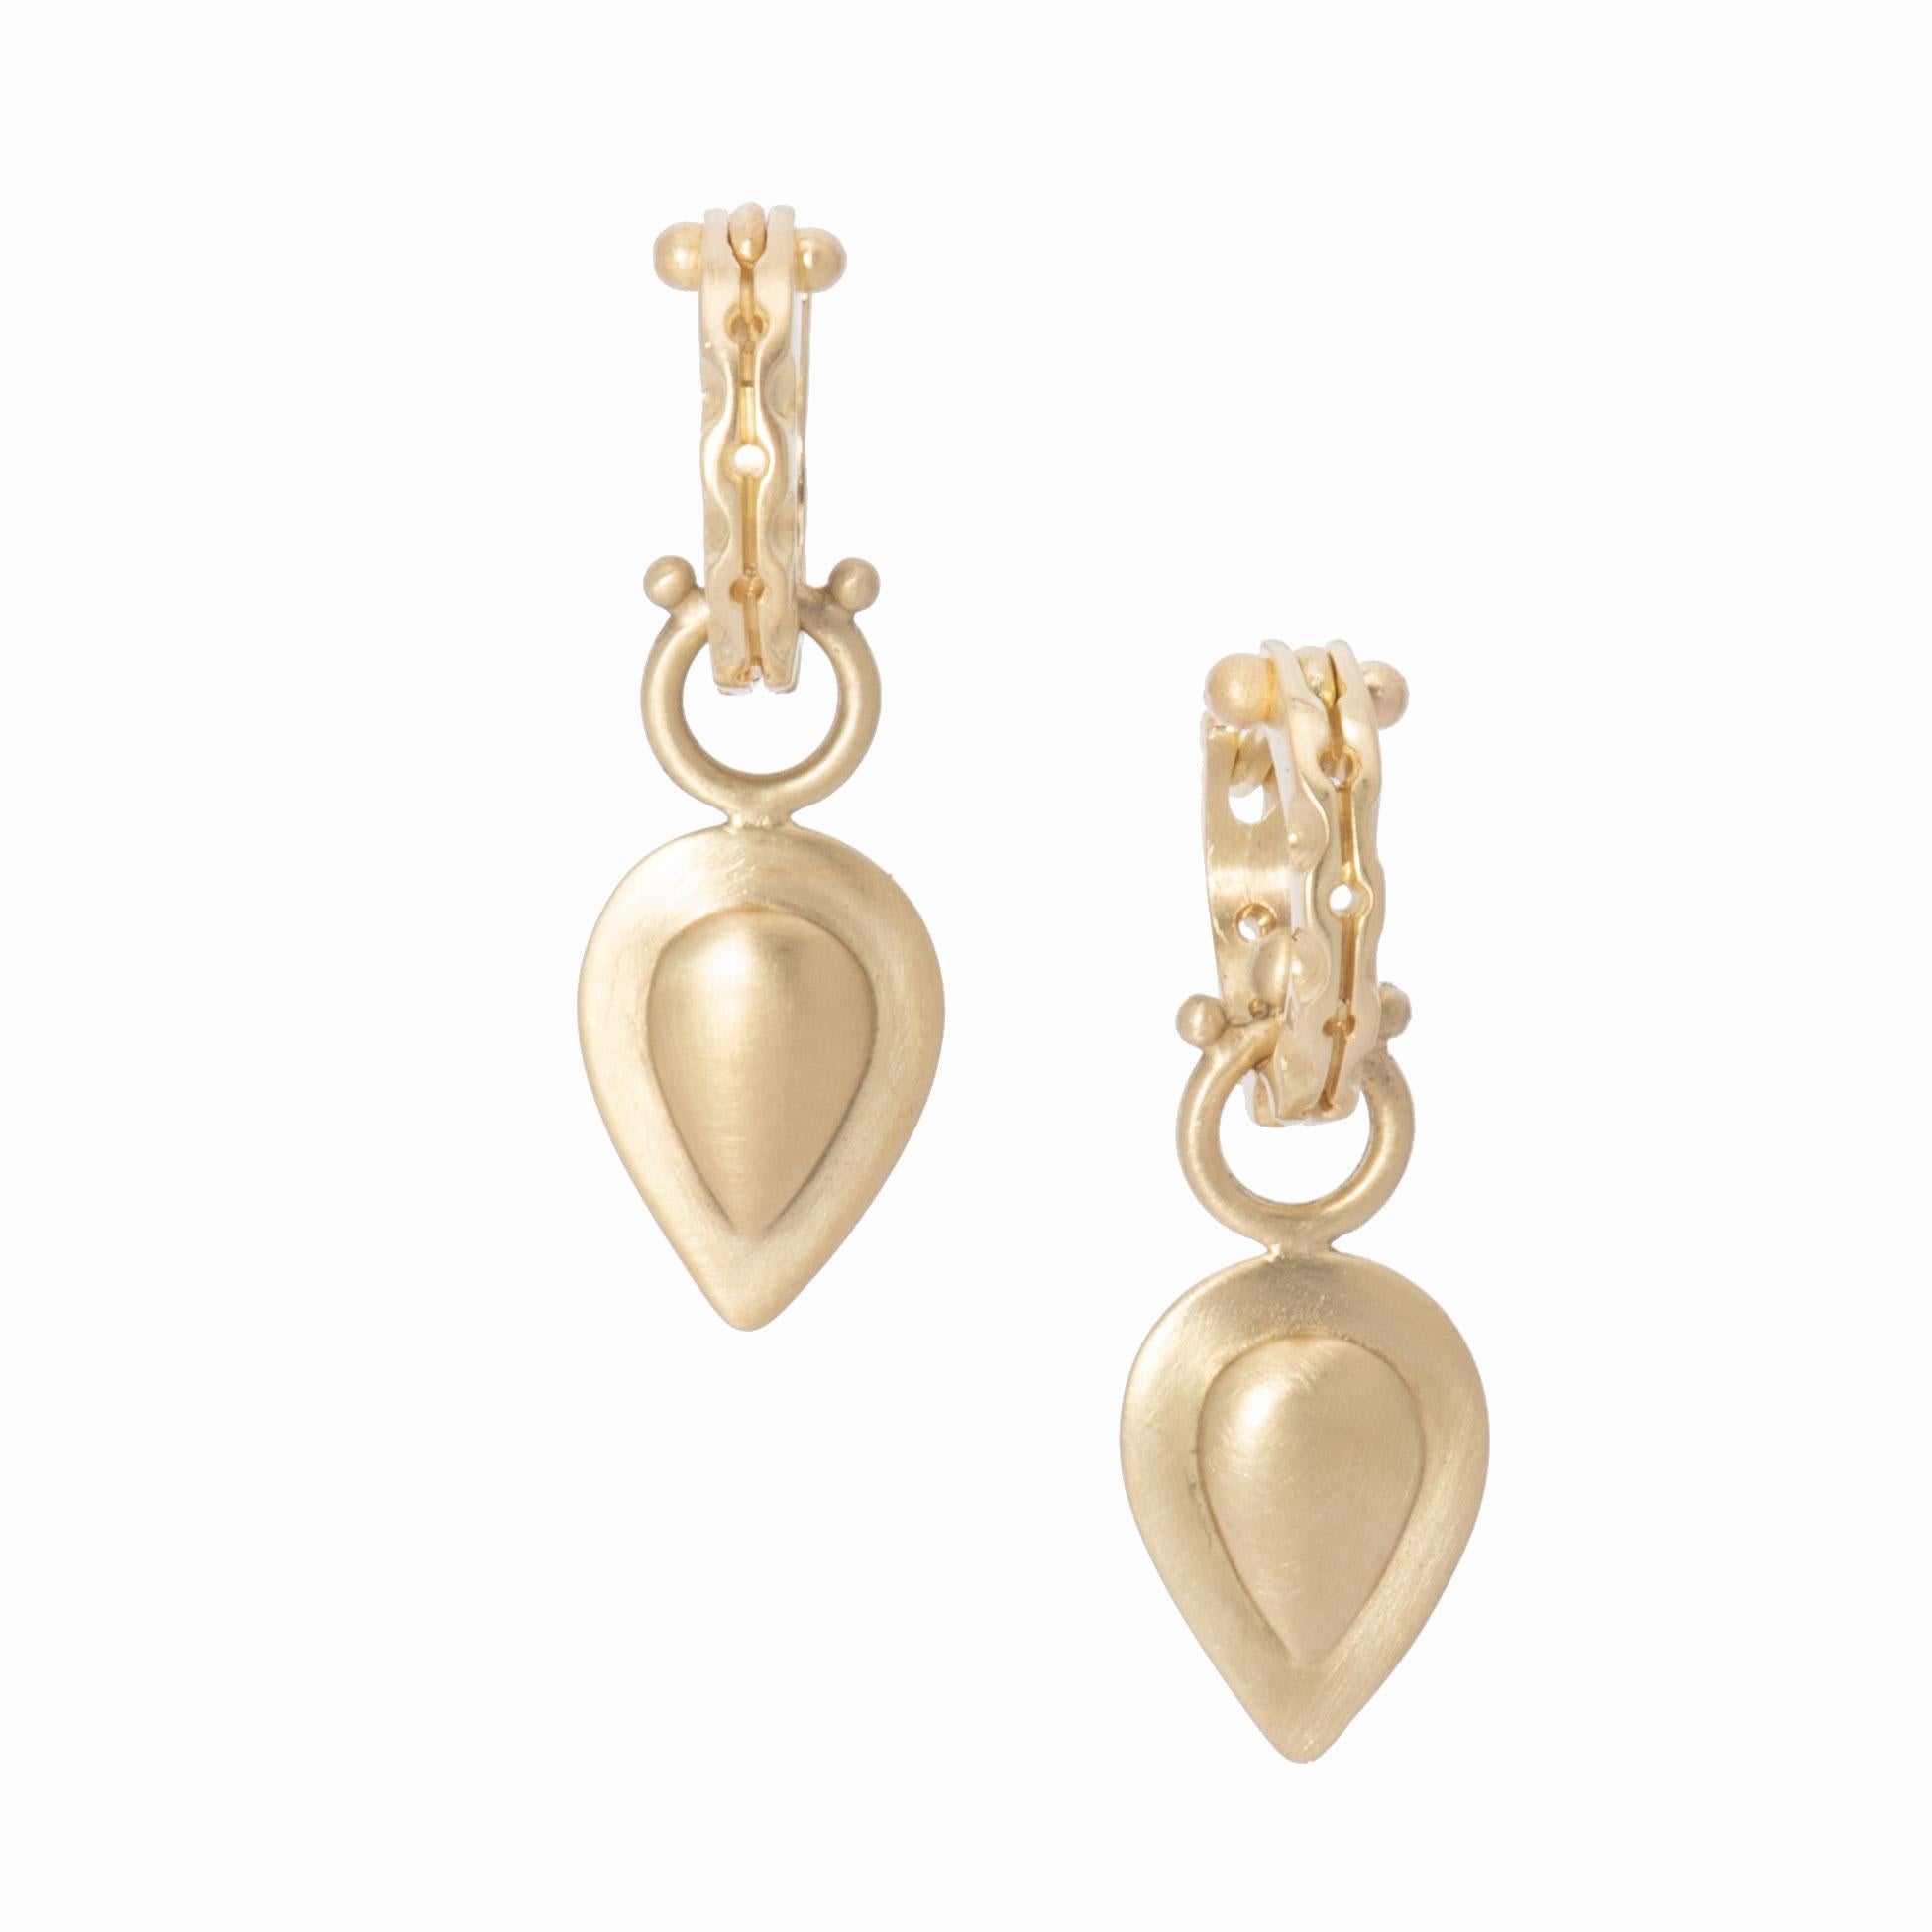 This flattering teardrop shape makes a simple, stylish statement in luscious 18k gold. The repousse design in our satin finished 18k gold is hand crafted in our studio and the result is a light weight, 3-dimensional Pear Drop, beaded on the bail and